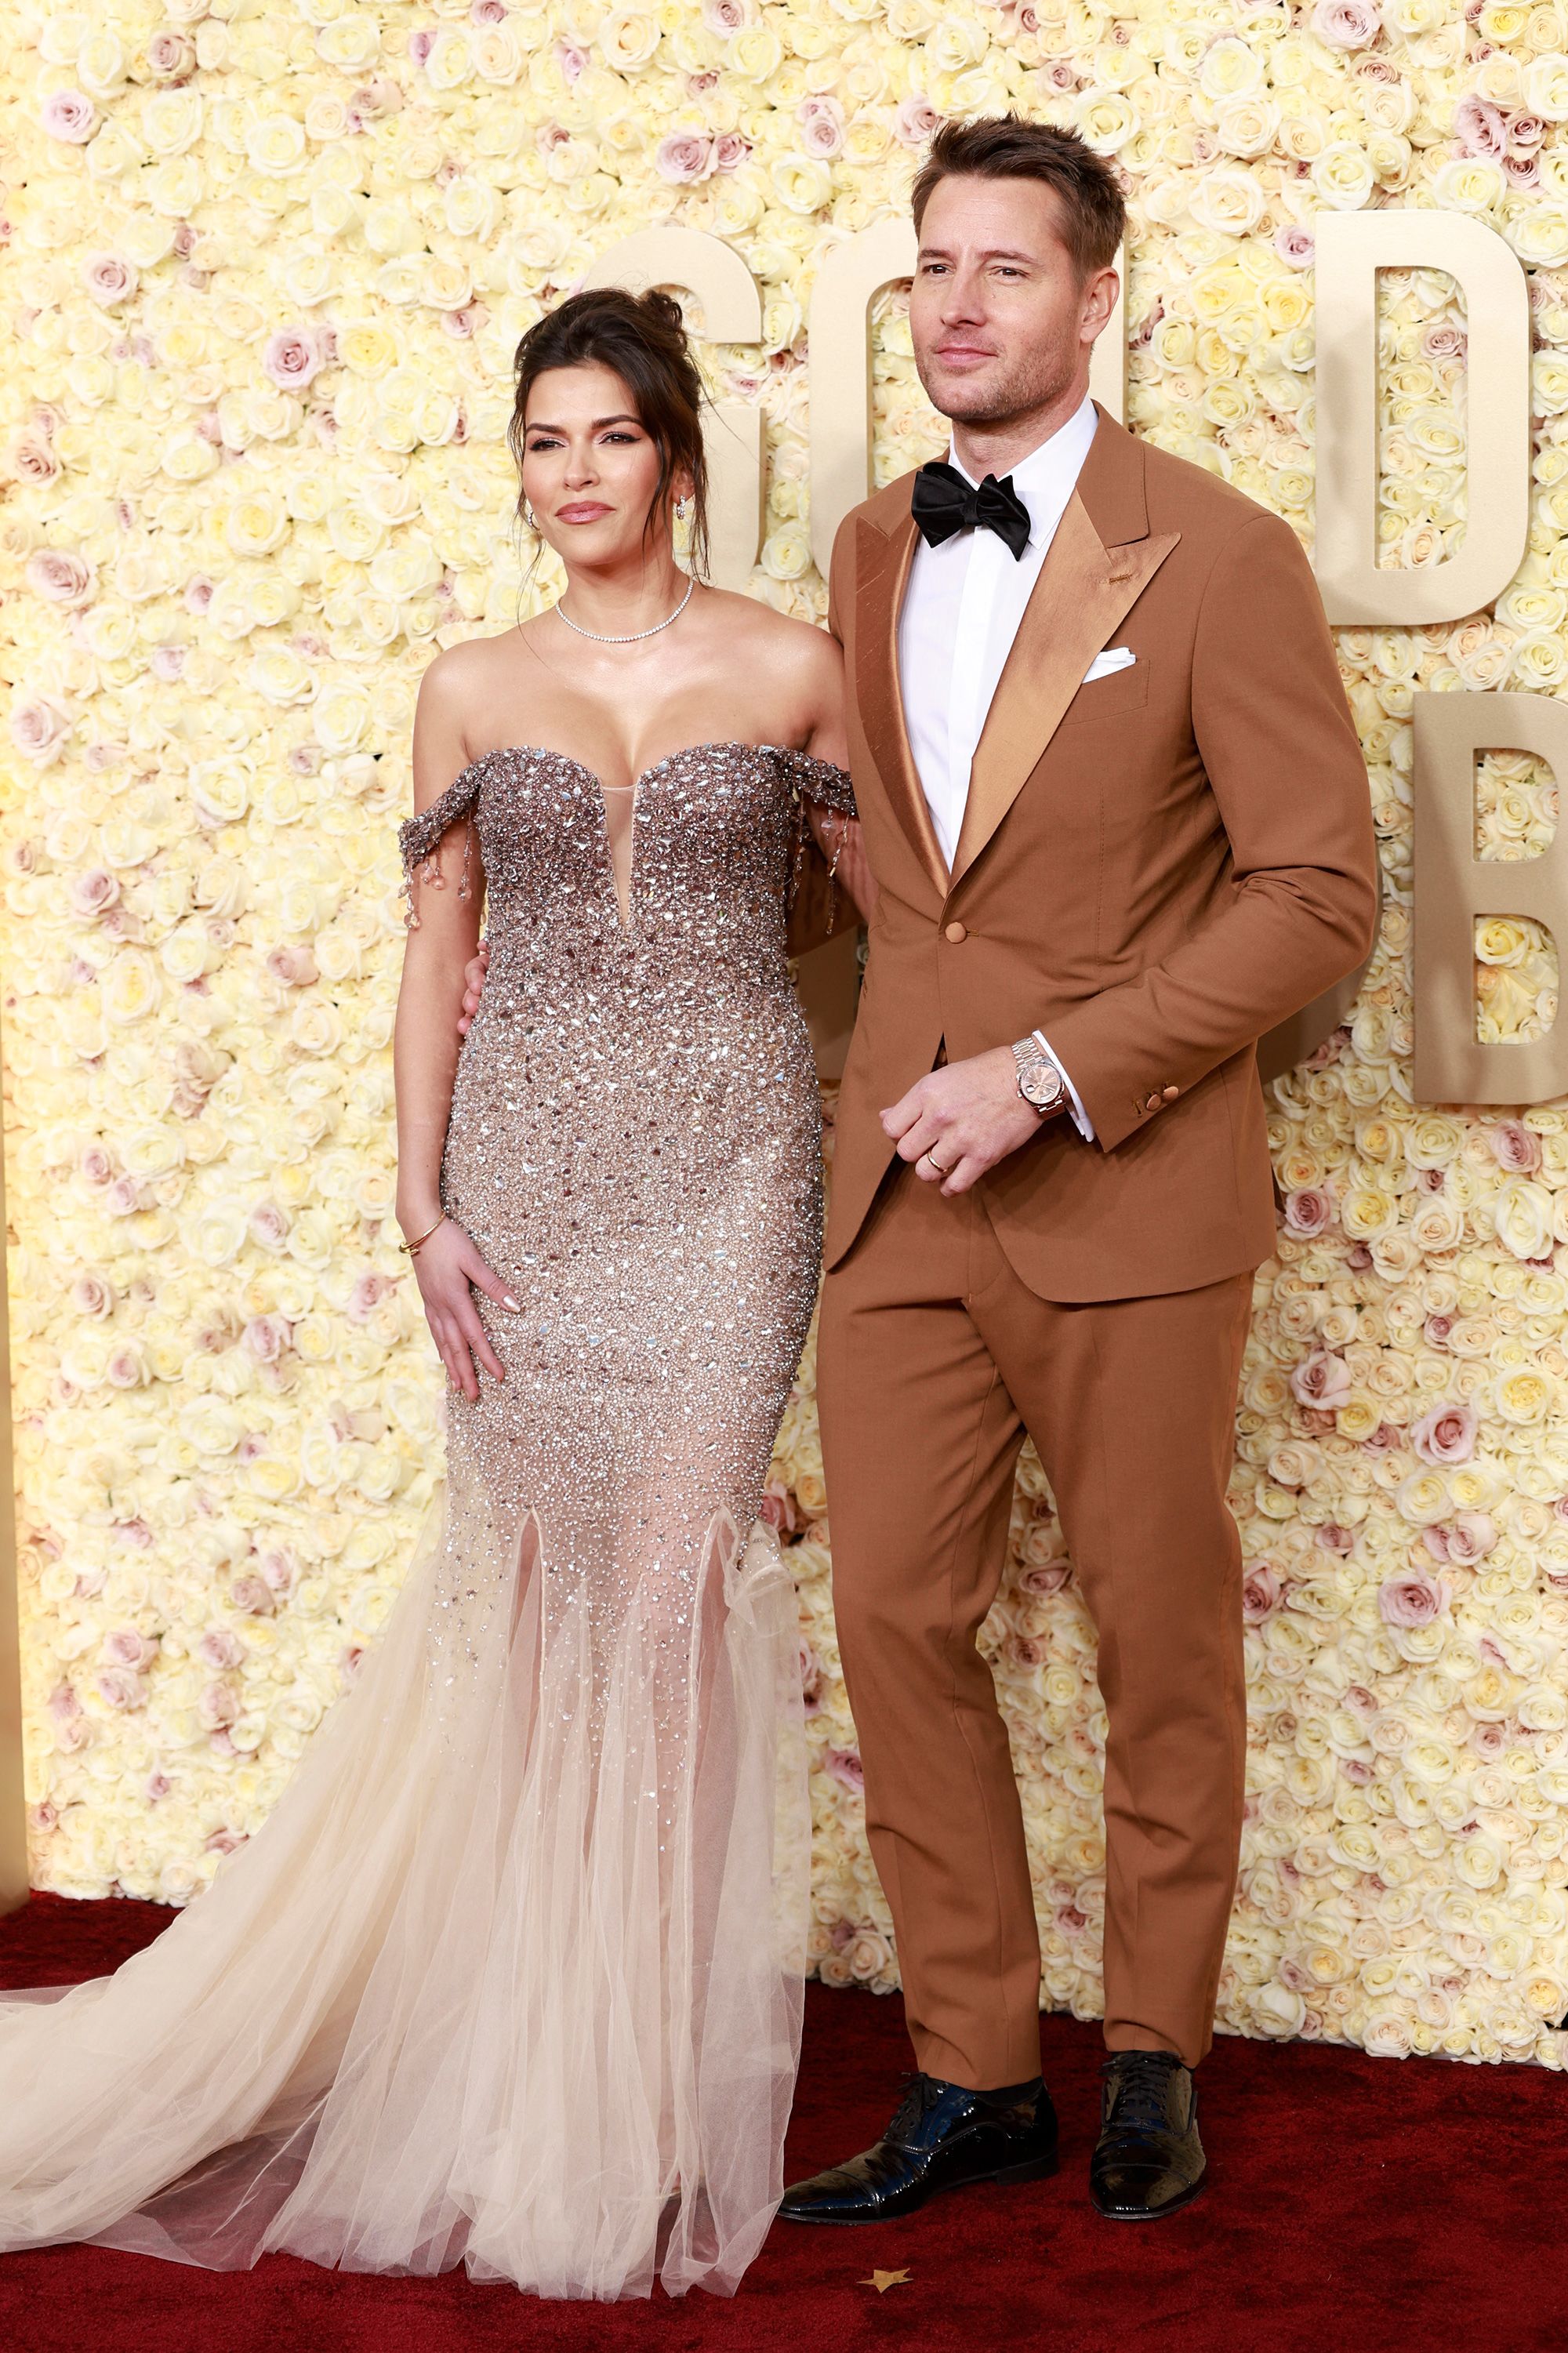 Actress Sofia Pernas was all sparkle and tulle in an ombre off-the-shoulder mermaid dress by Pamella Roland. Her husband, “This is Us” star Justin Hartley, wore an ochre Nana Sartoria tuxedo paired with dark bowtie, black patent Oxfords by Christian Louboutin and a Rolex watch.